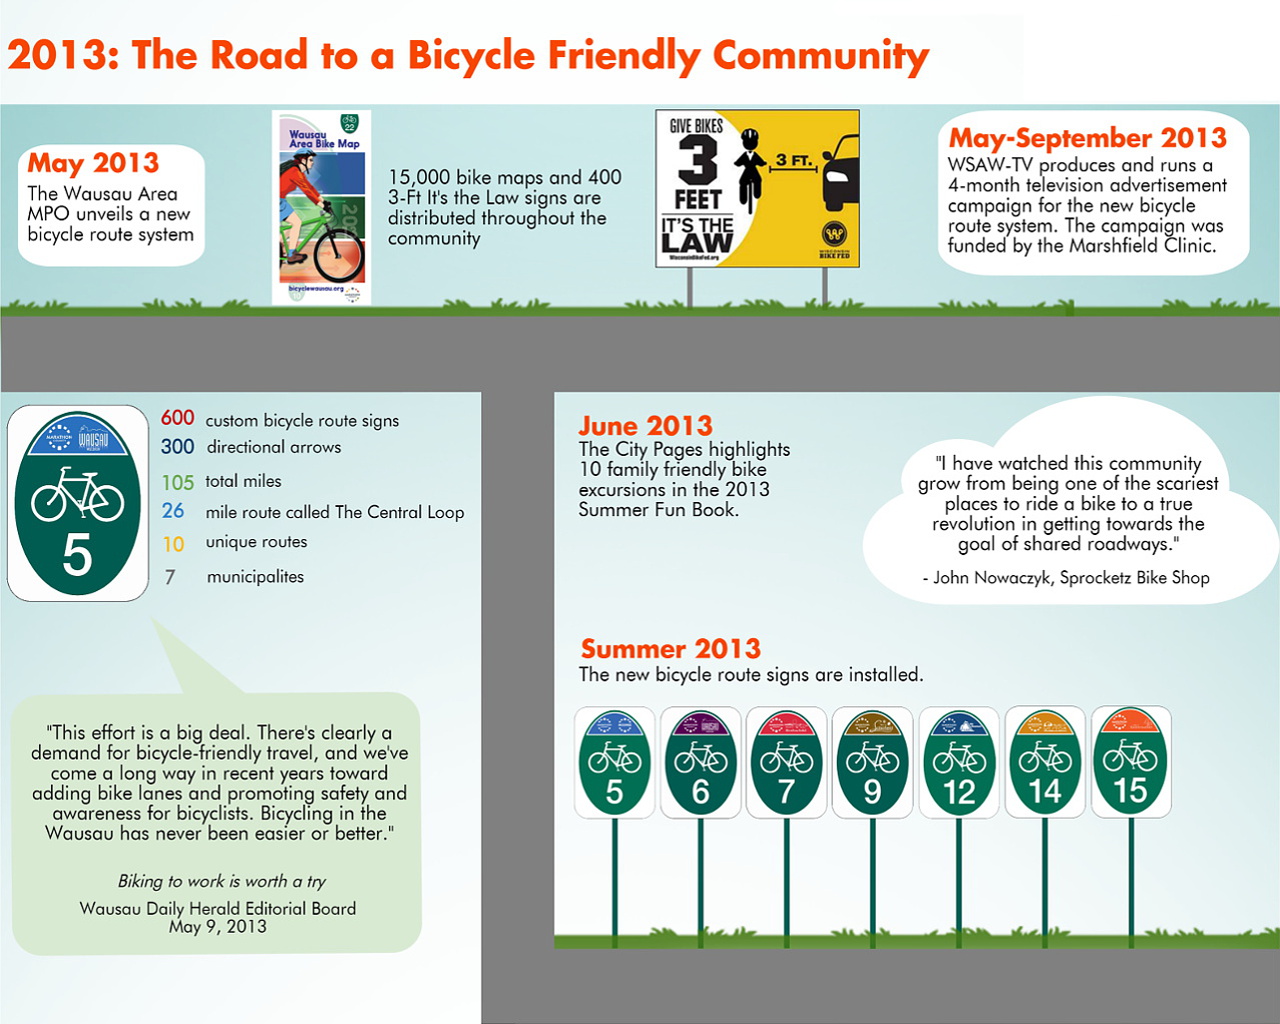 2013: The Road to a Bicycle Friendly Community